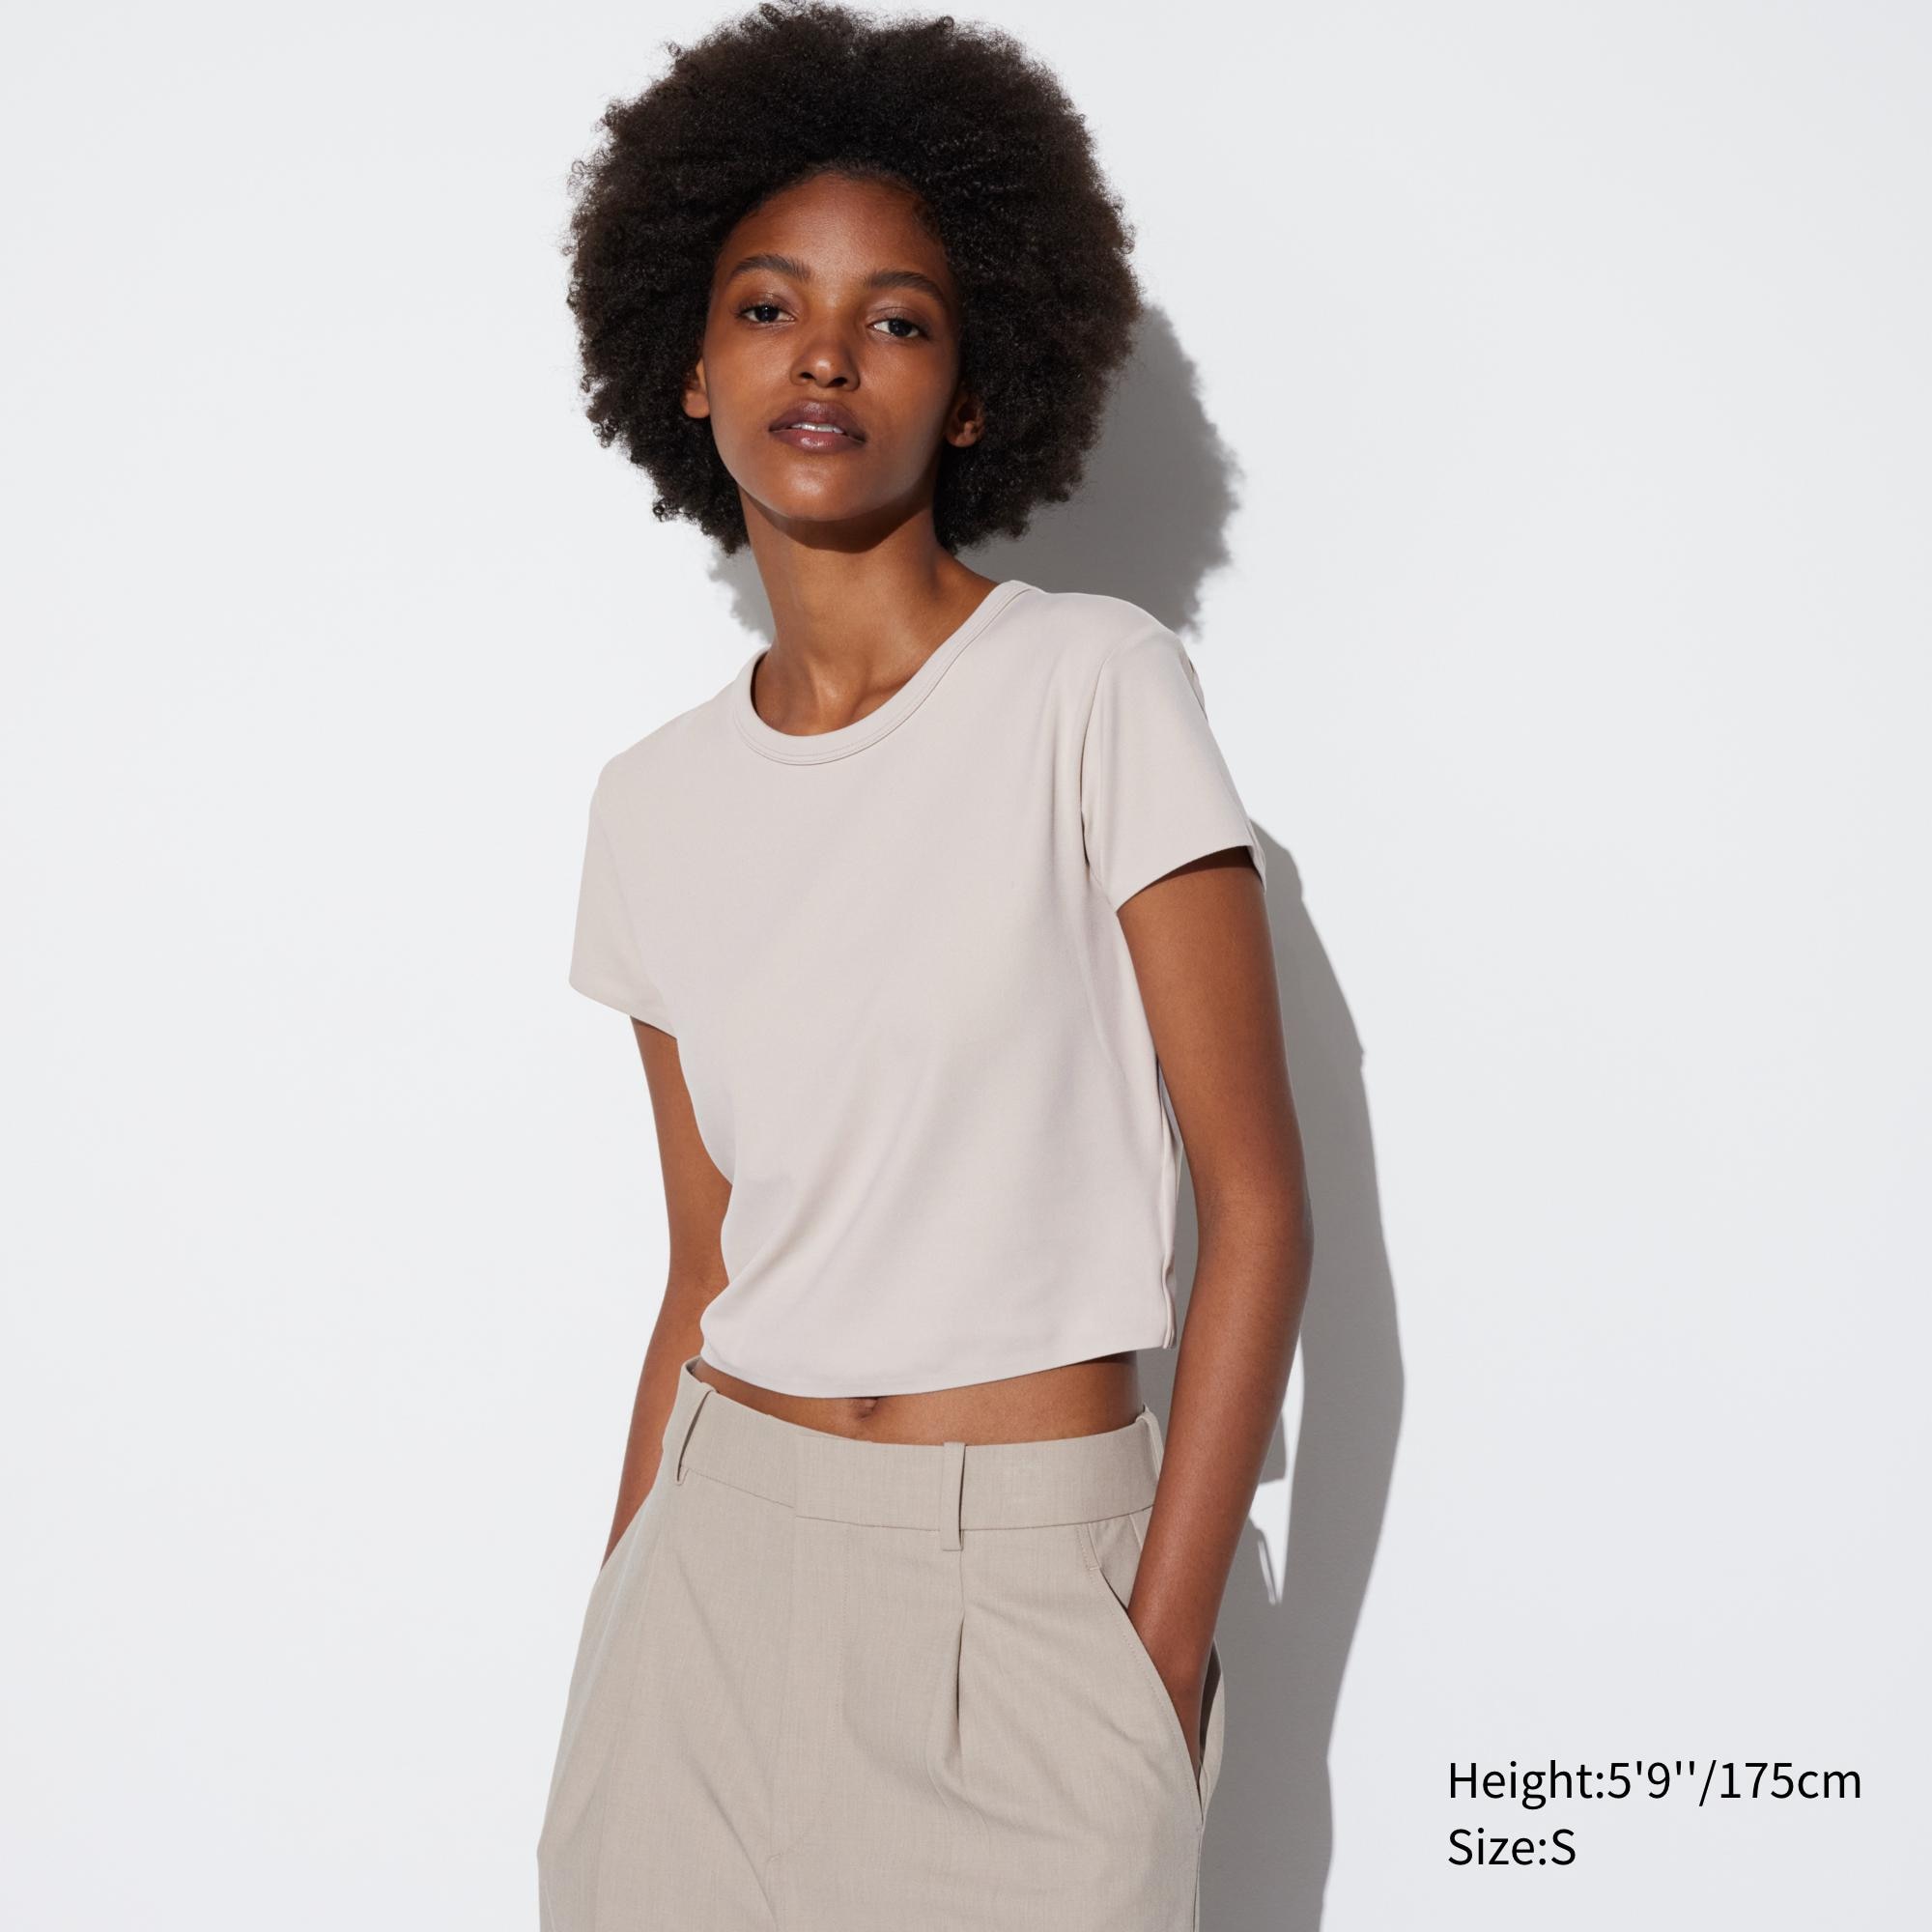 Uniqlo Singapore - “AIRism BRATOPs are almost like a one size fits all.  Your body changes as you breastfeed and the AIRism top stretches together  with your body. The AIRism material doesn't